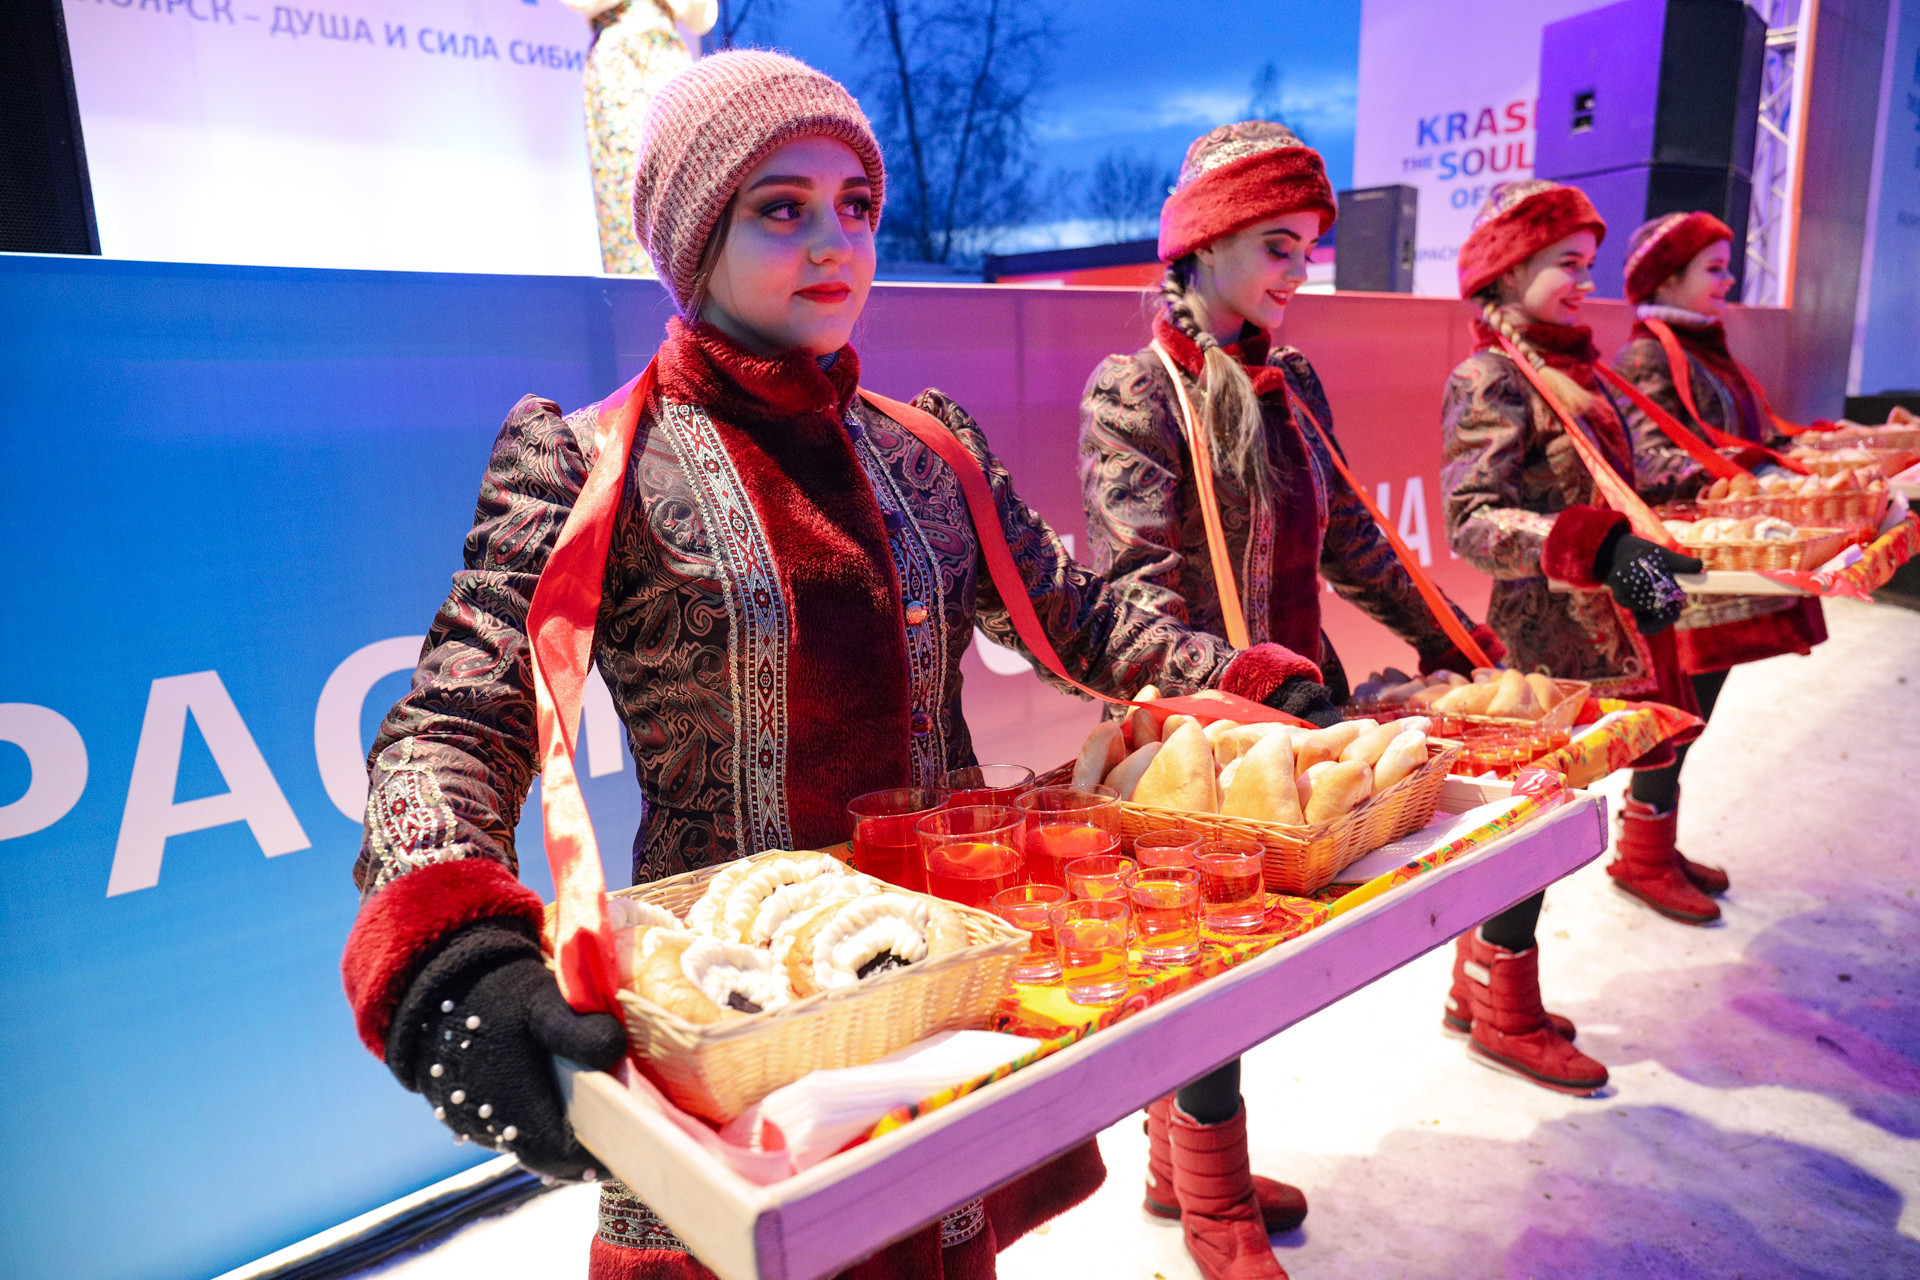 Sculptors were given pasties at the opening event of the ice festival and contest ©Krasnoyarsk 2019